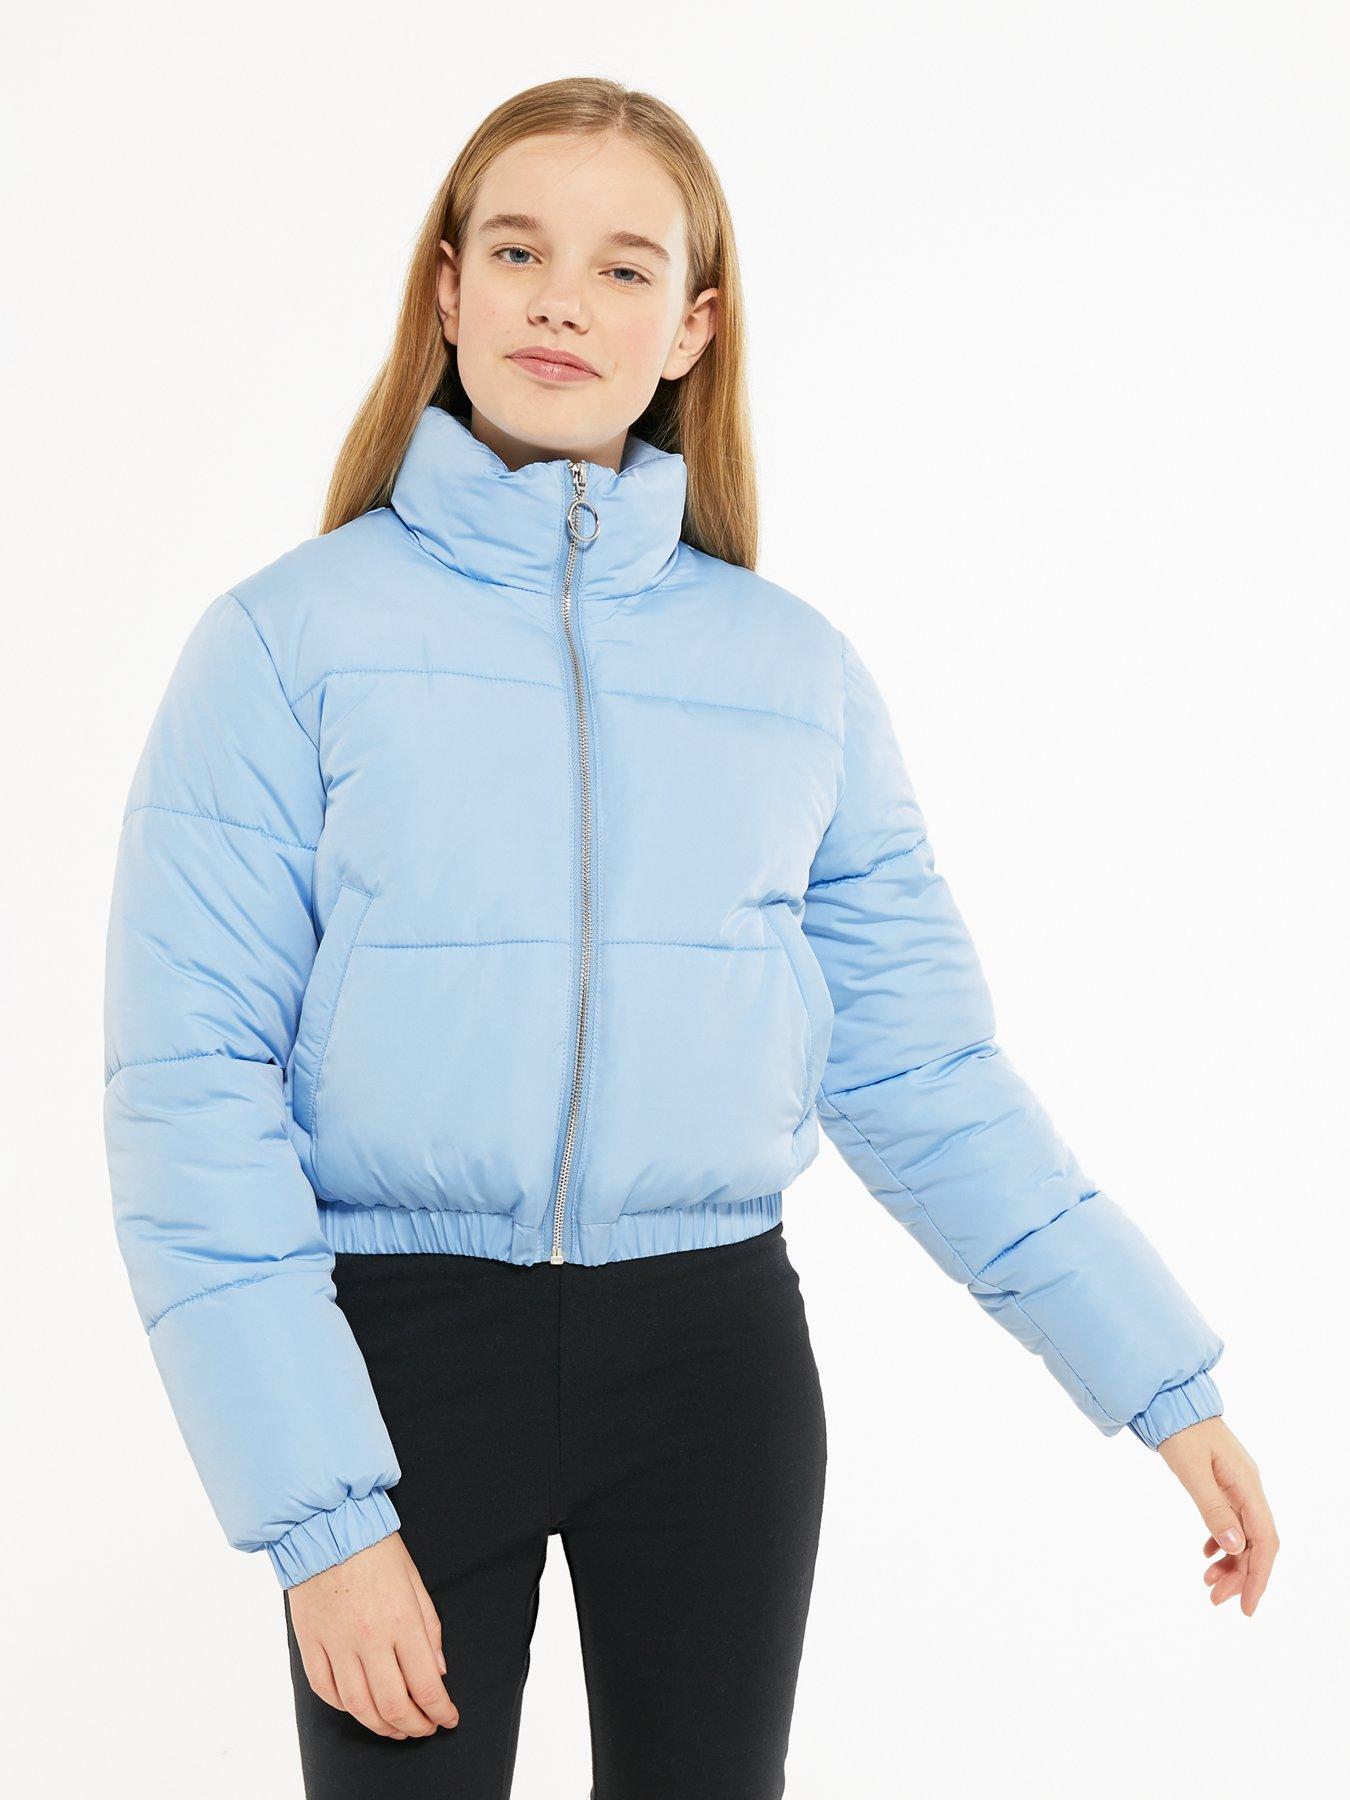 New Look 915 Girls Padded Jacket - Pale Blue | very.co.uk